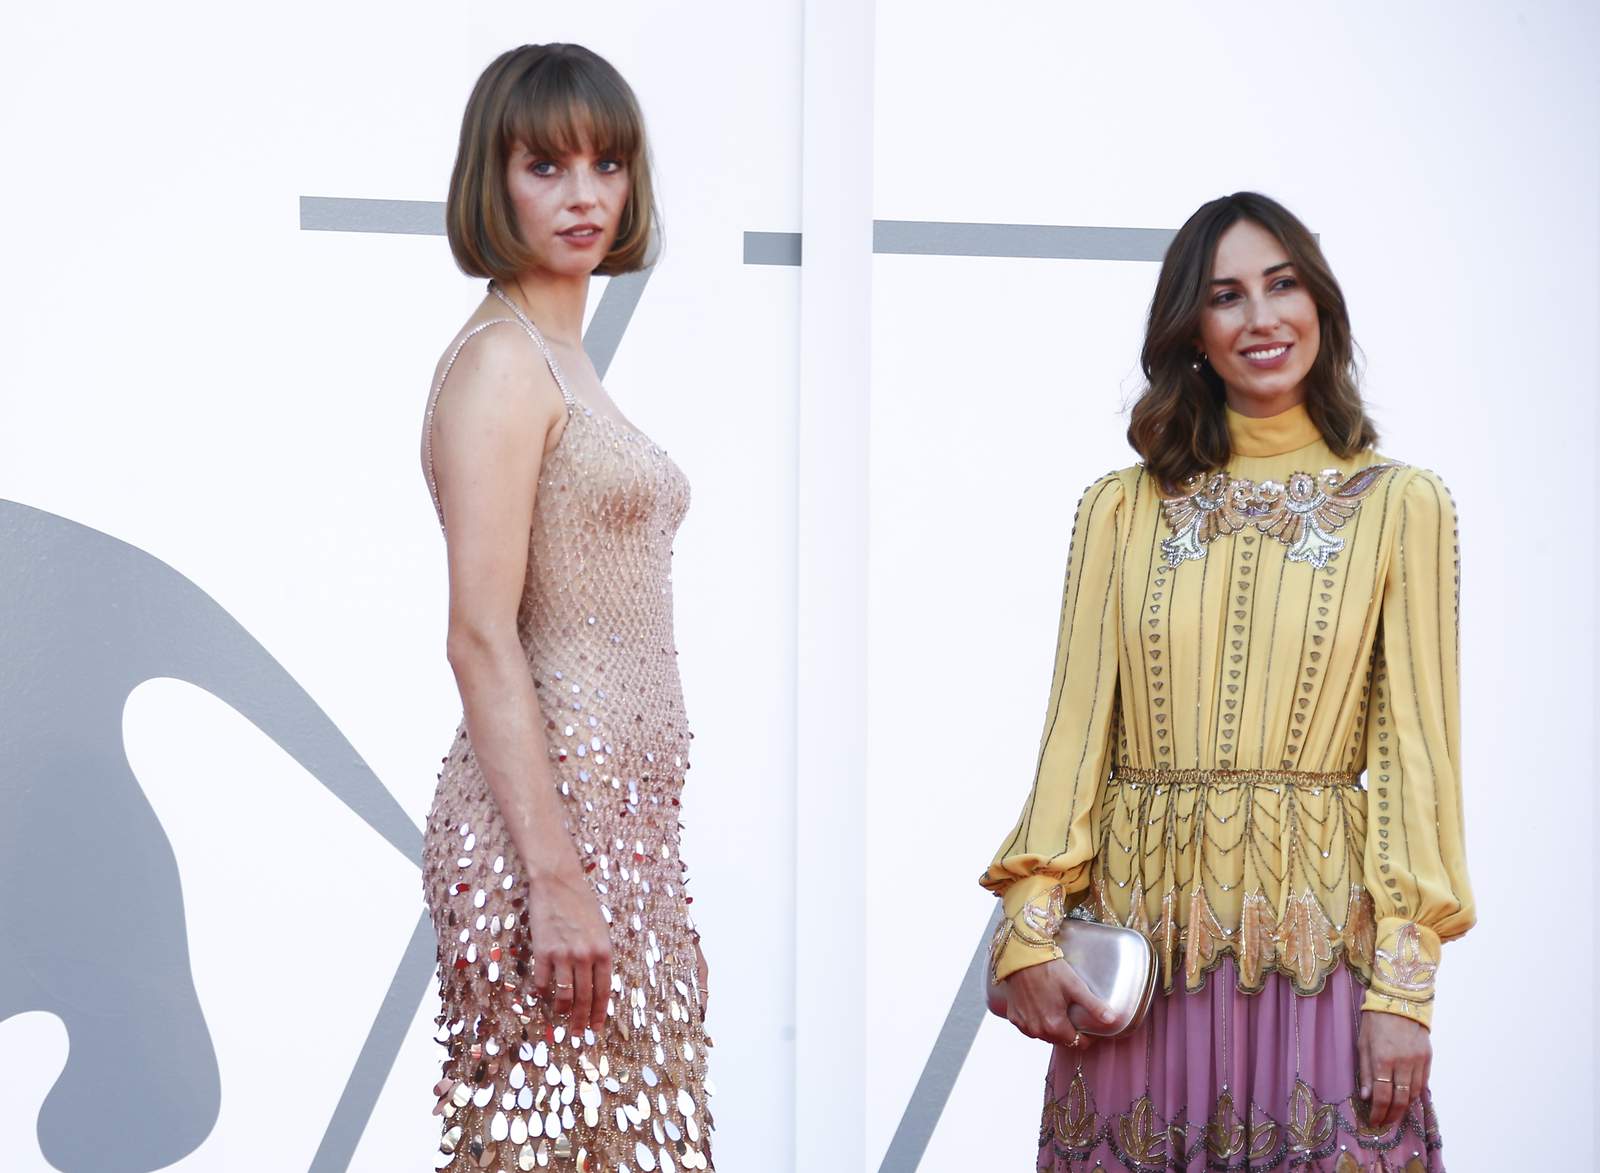 Influencer culture skewered in Gia Coppola film at Venice